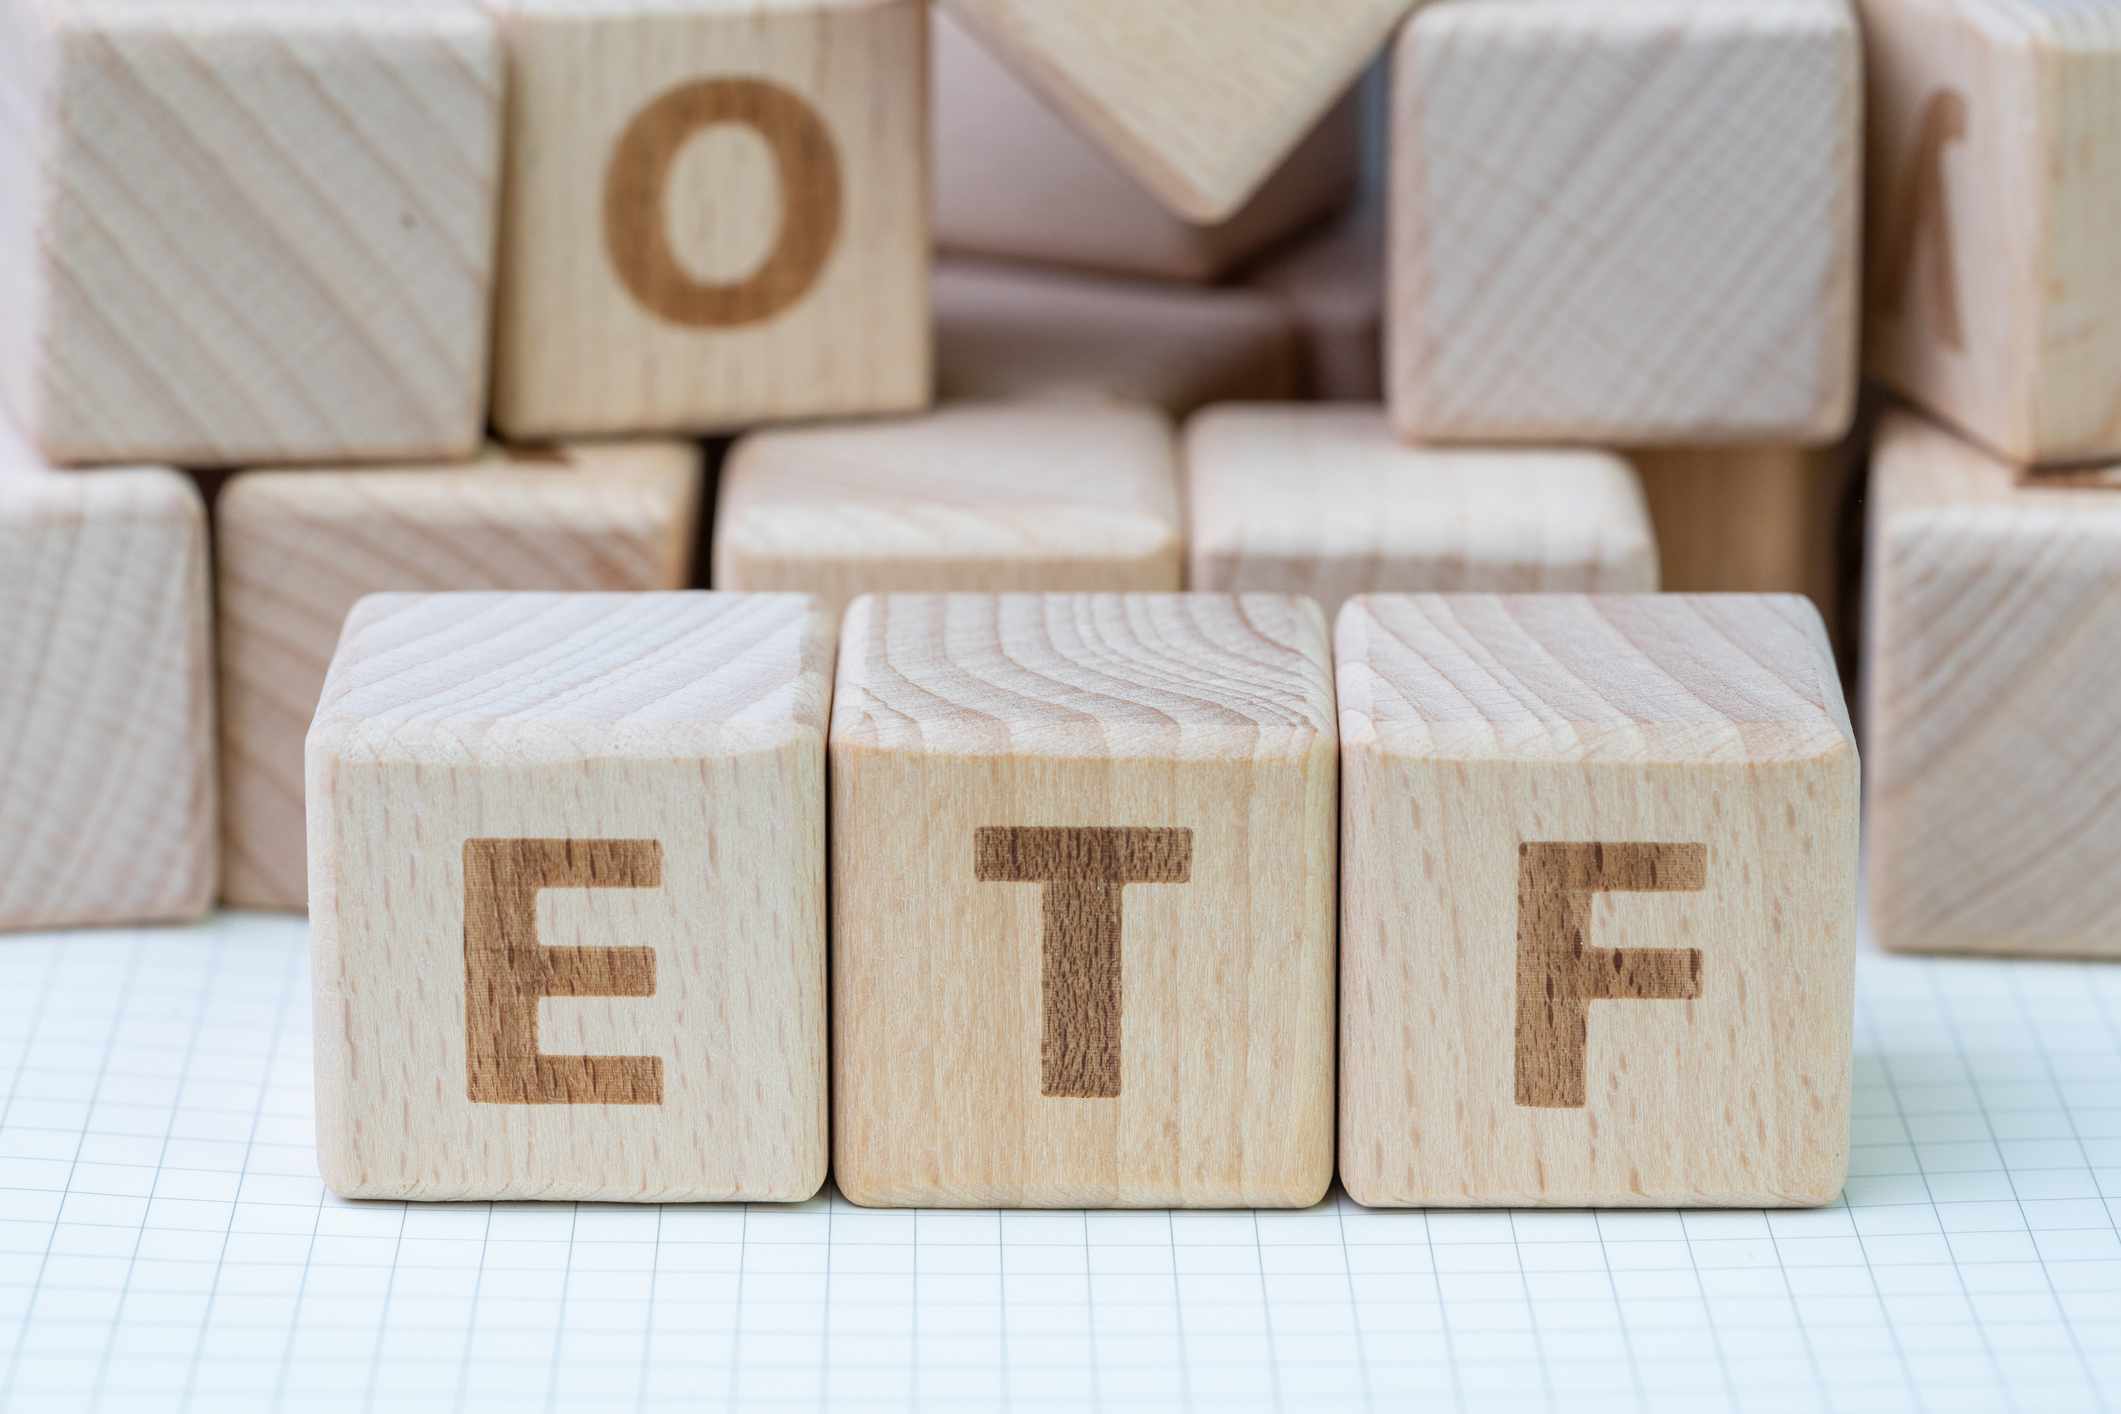 Cube wooden blocks with alphabet building the word ETF.